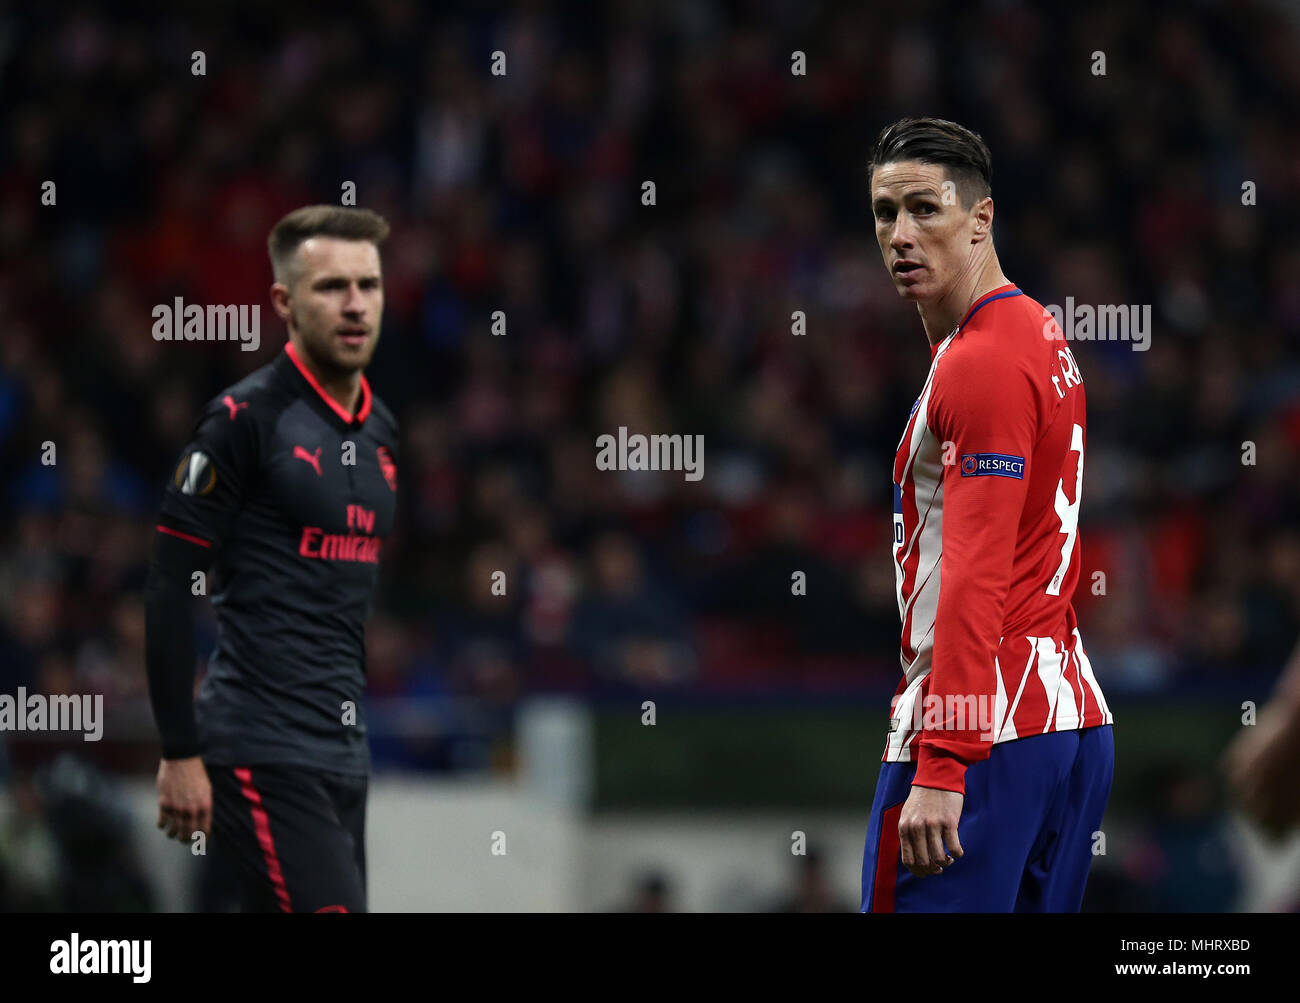 Madrid, Madrid, Spain. 3rd May, 2018. Fernando Torres (Club Atletico de Madrid) seen during the UEFA Europa League Semi Final Second Leg match between Atletico de Madrid and Arsenal FC at the Wanda Metropolitano Stadium in Madrid, Spain.Final Score Credit: Manu Reino/SOPA Images/ZUMA Wire/Alamy Live News Stock Photo